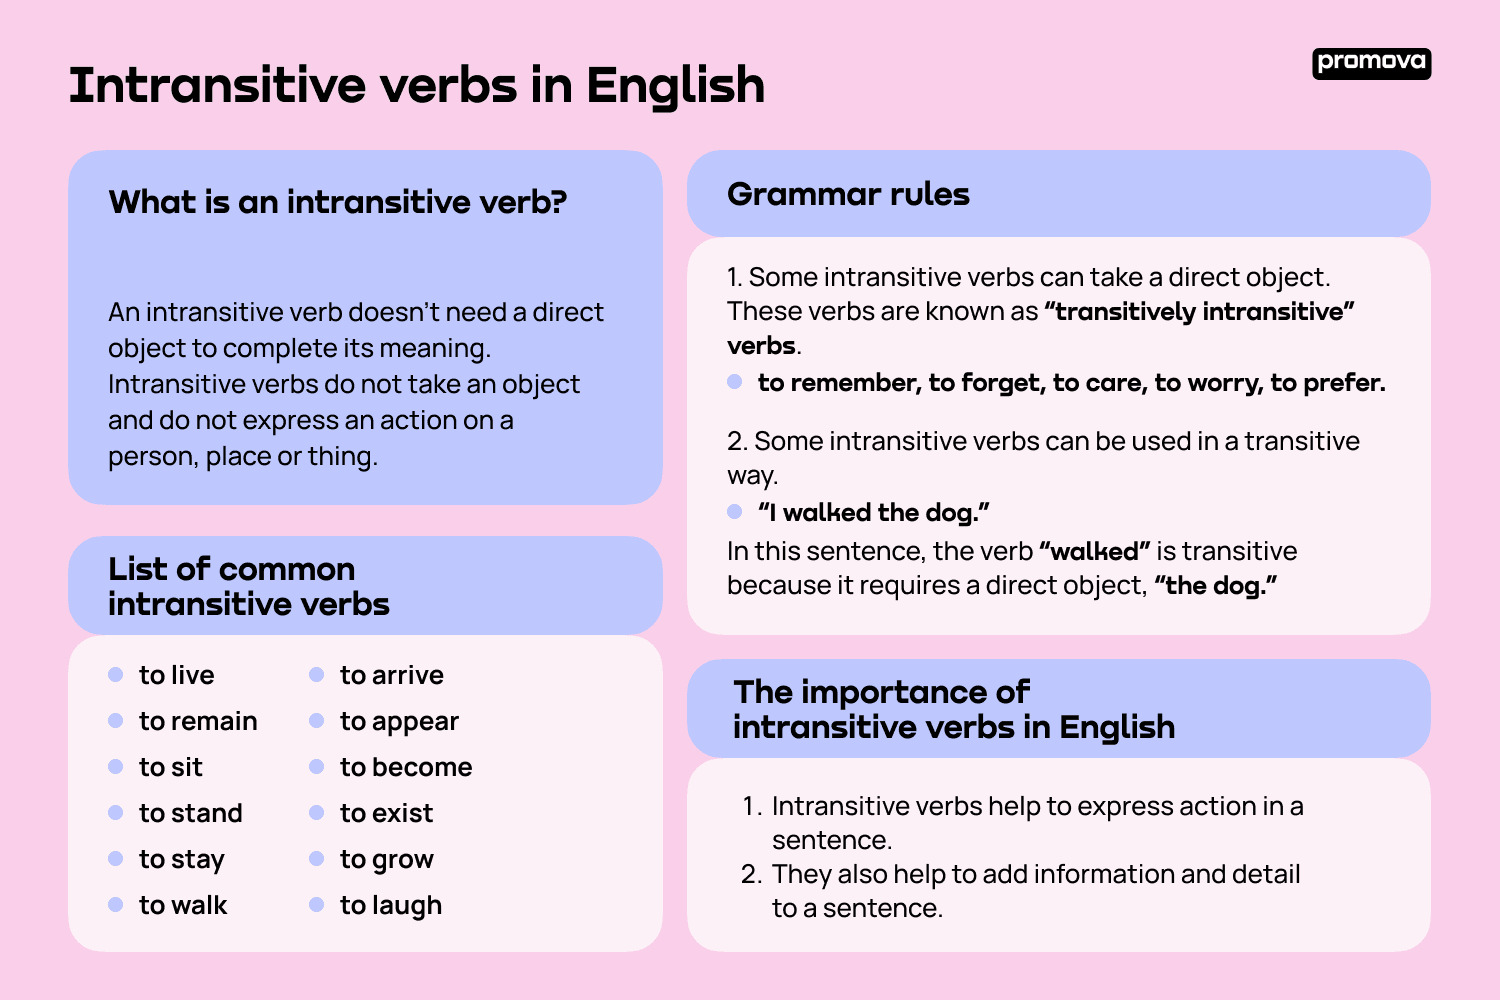 Intransitive verbs in English